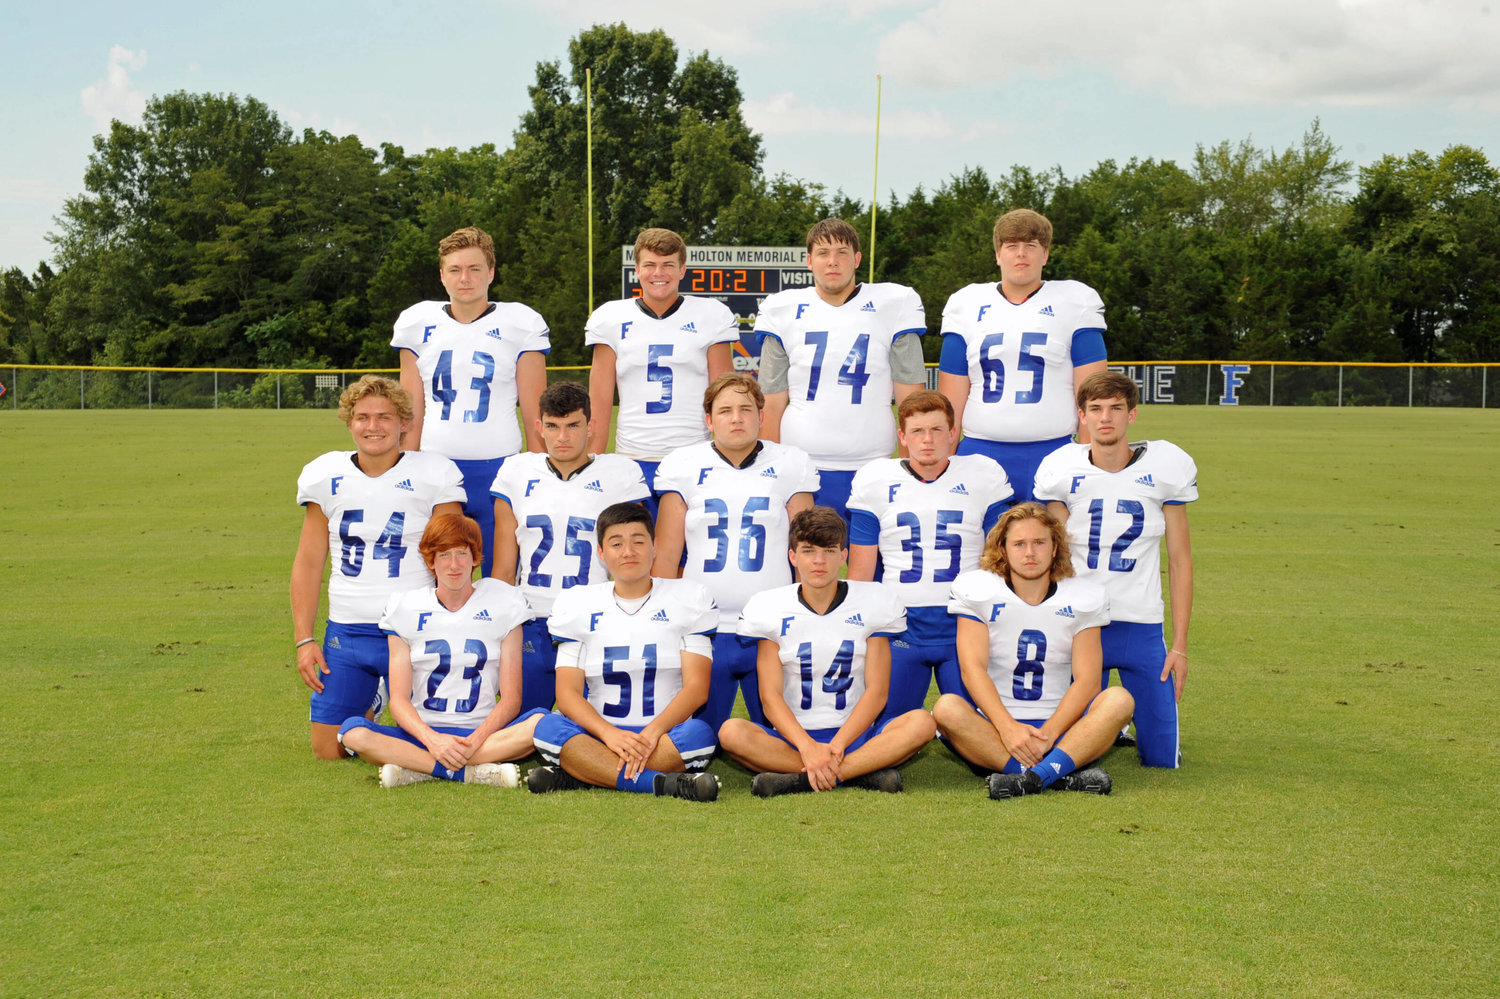 The 2020 Forrest seniors front row from left are, Layne Bowman, Jonathon Monreal, Carson Baker, and Hunter Pendley. Middle row from left are, Noah Hill, Aden Freeman, Jordan Voss, Joseph Whittaker, and Cole Perryman. Back row from left are, Boston Follis, Max Kirby, Bridger Blue, and Reese Thrasher.